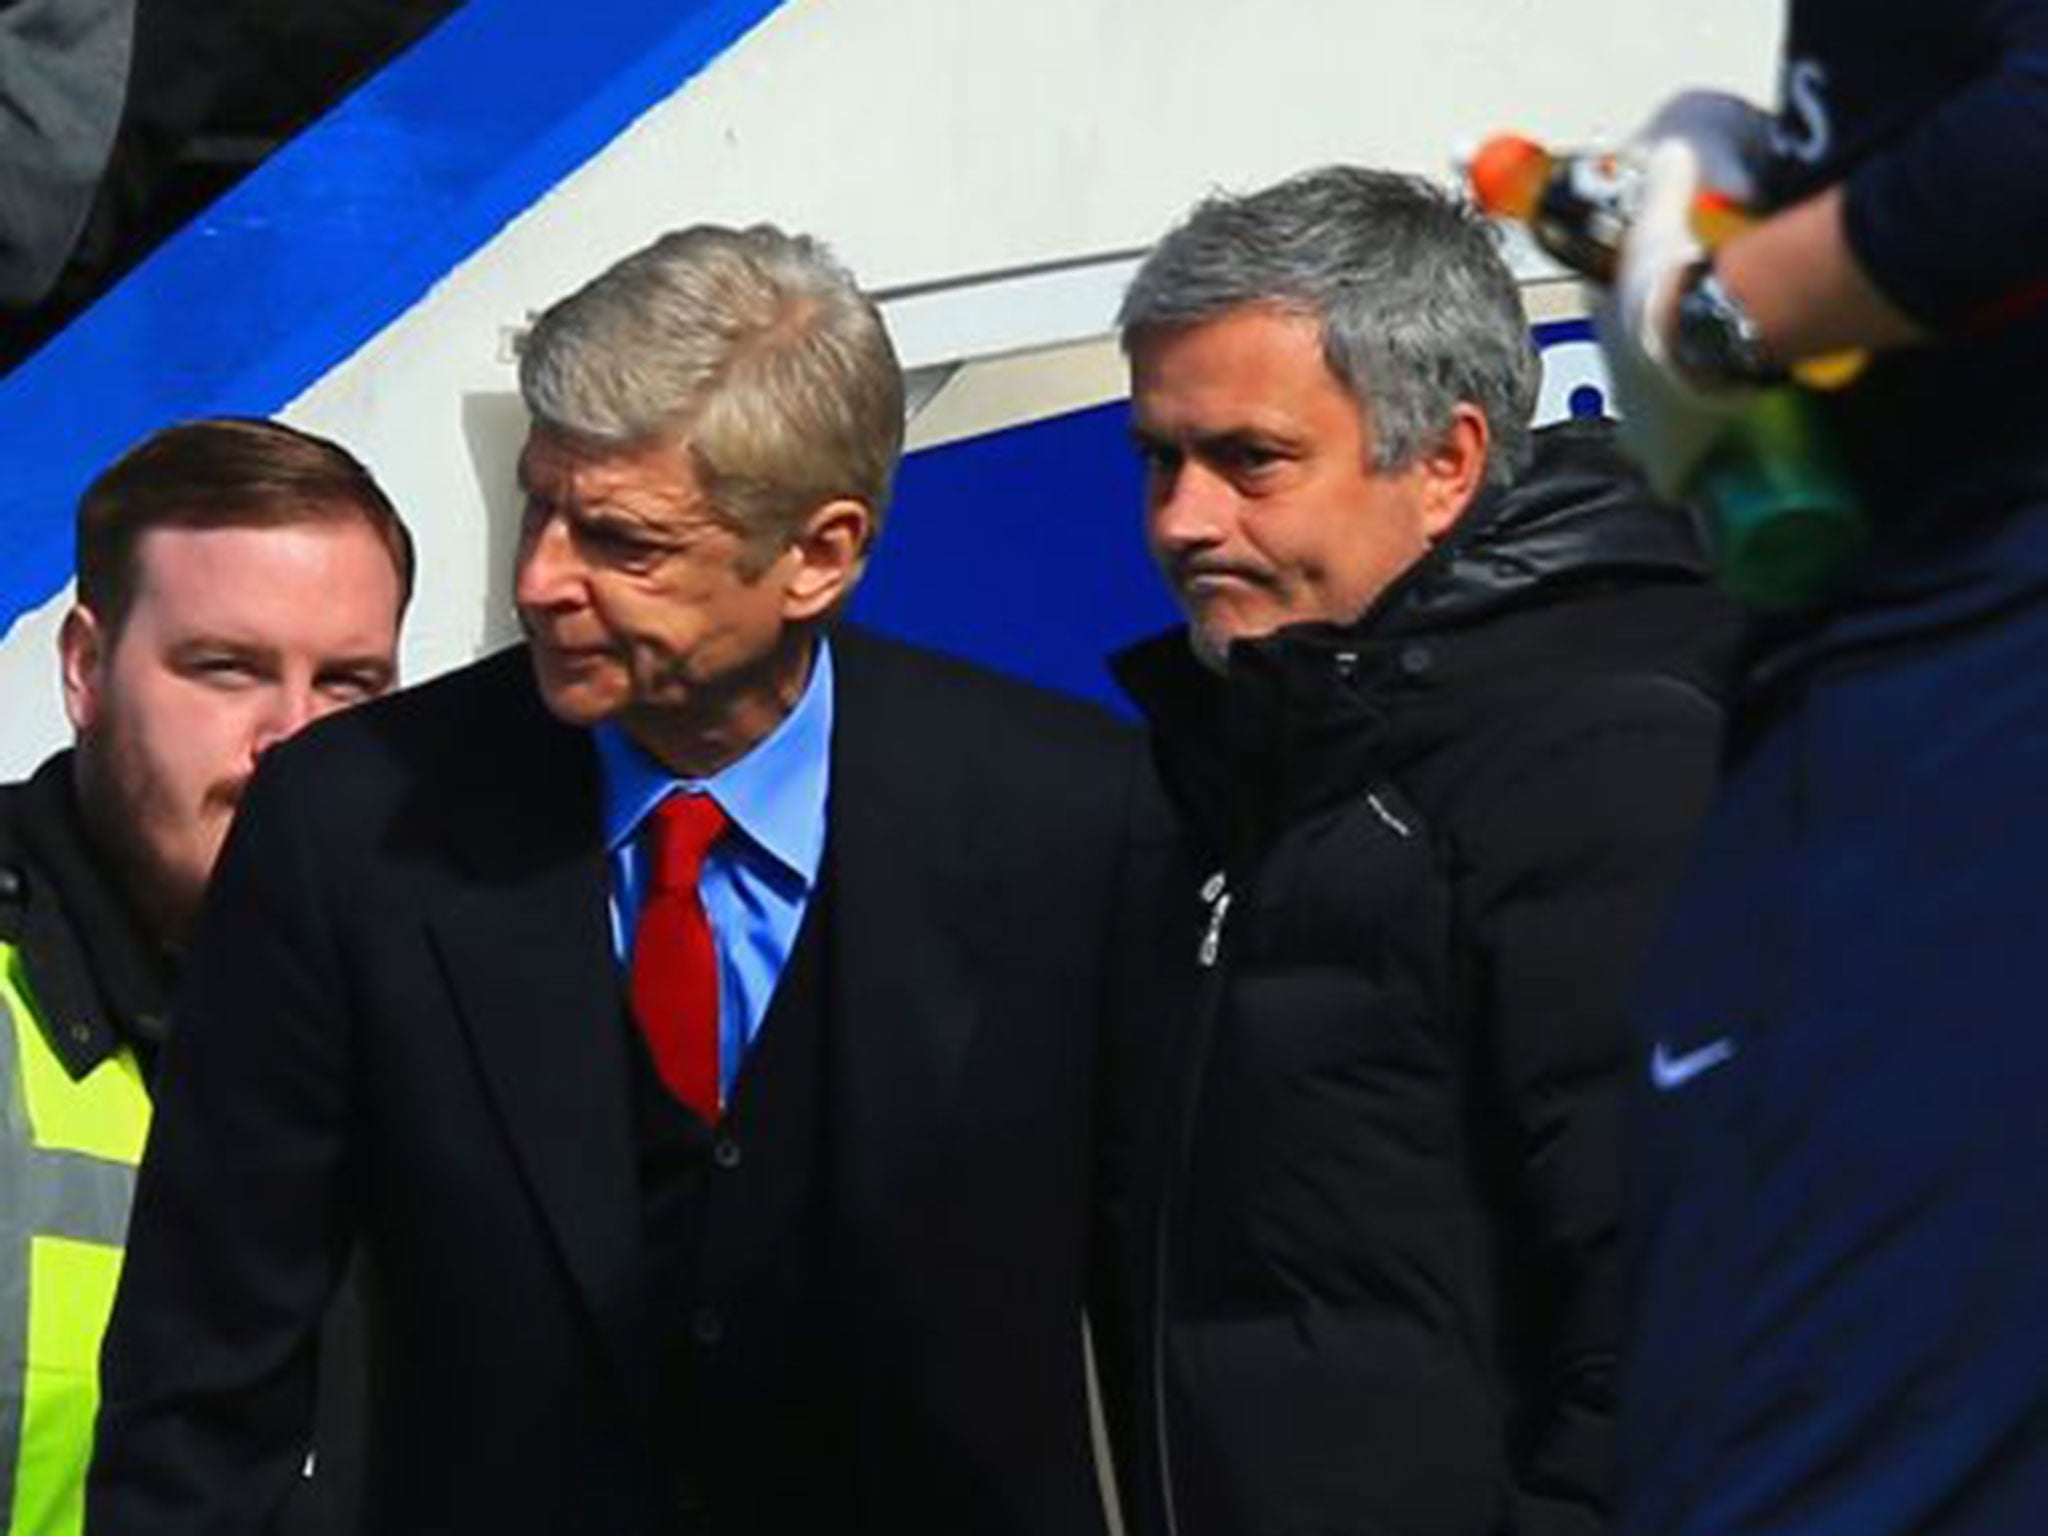 Arsène Wenger's Arsenal side were humiliated 6-0 by Mourinho's Chelsea at Stamford Bridge in March